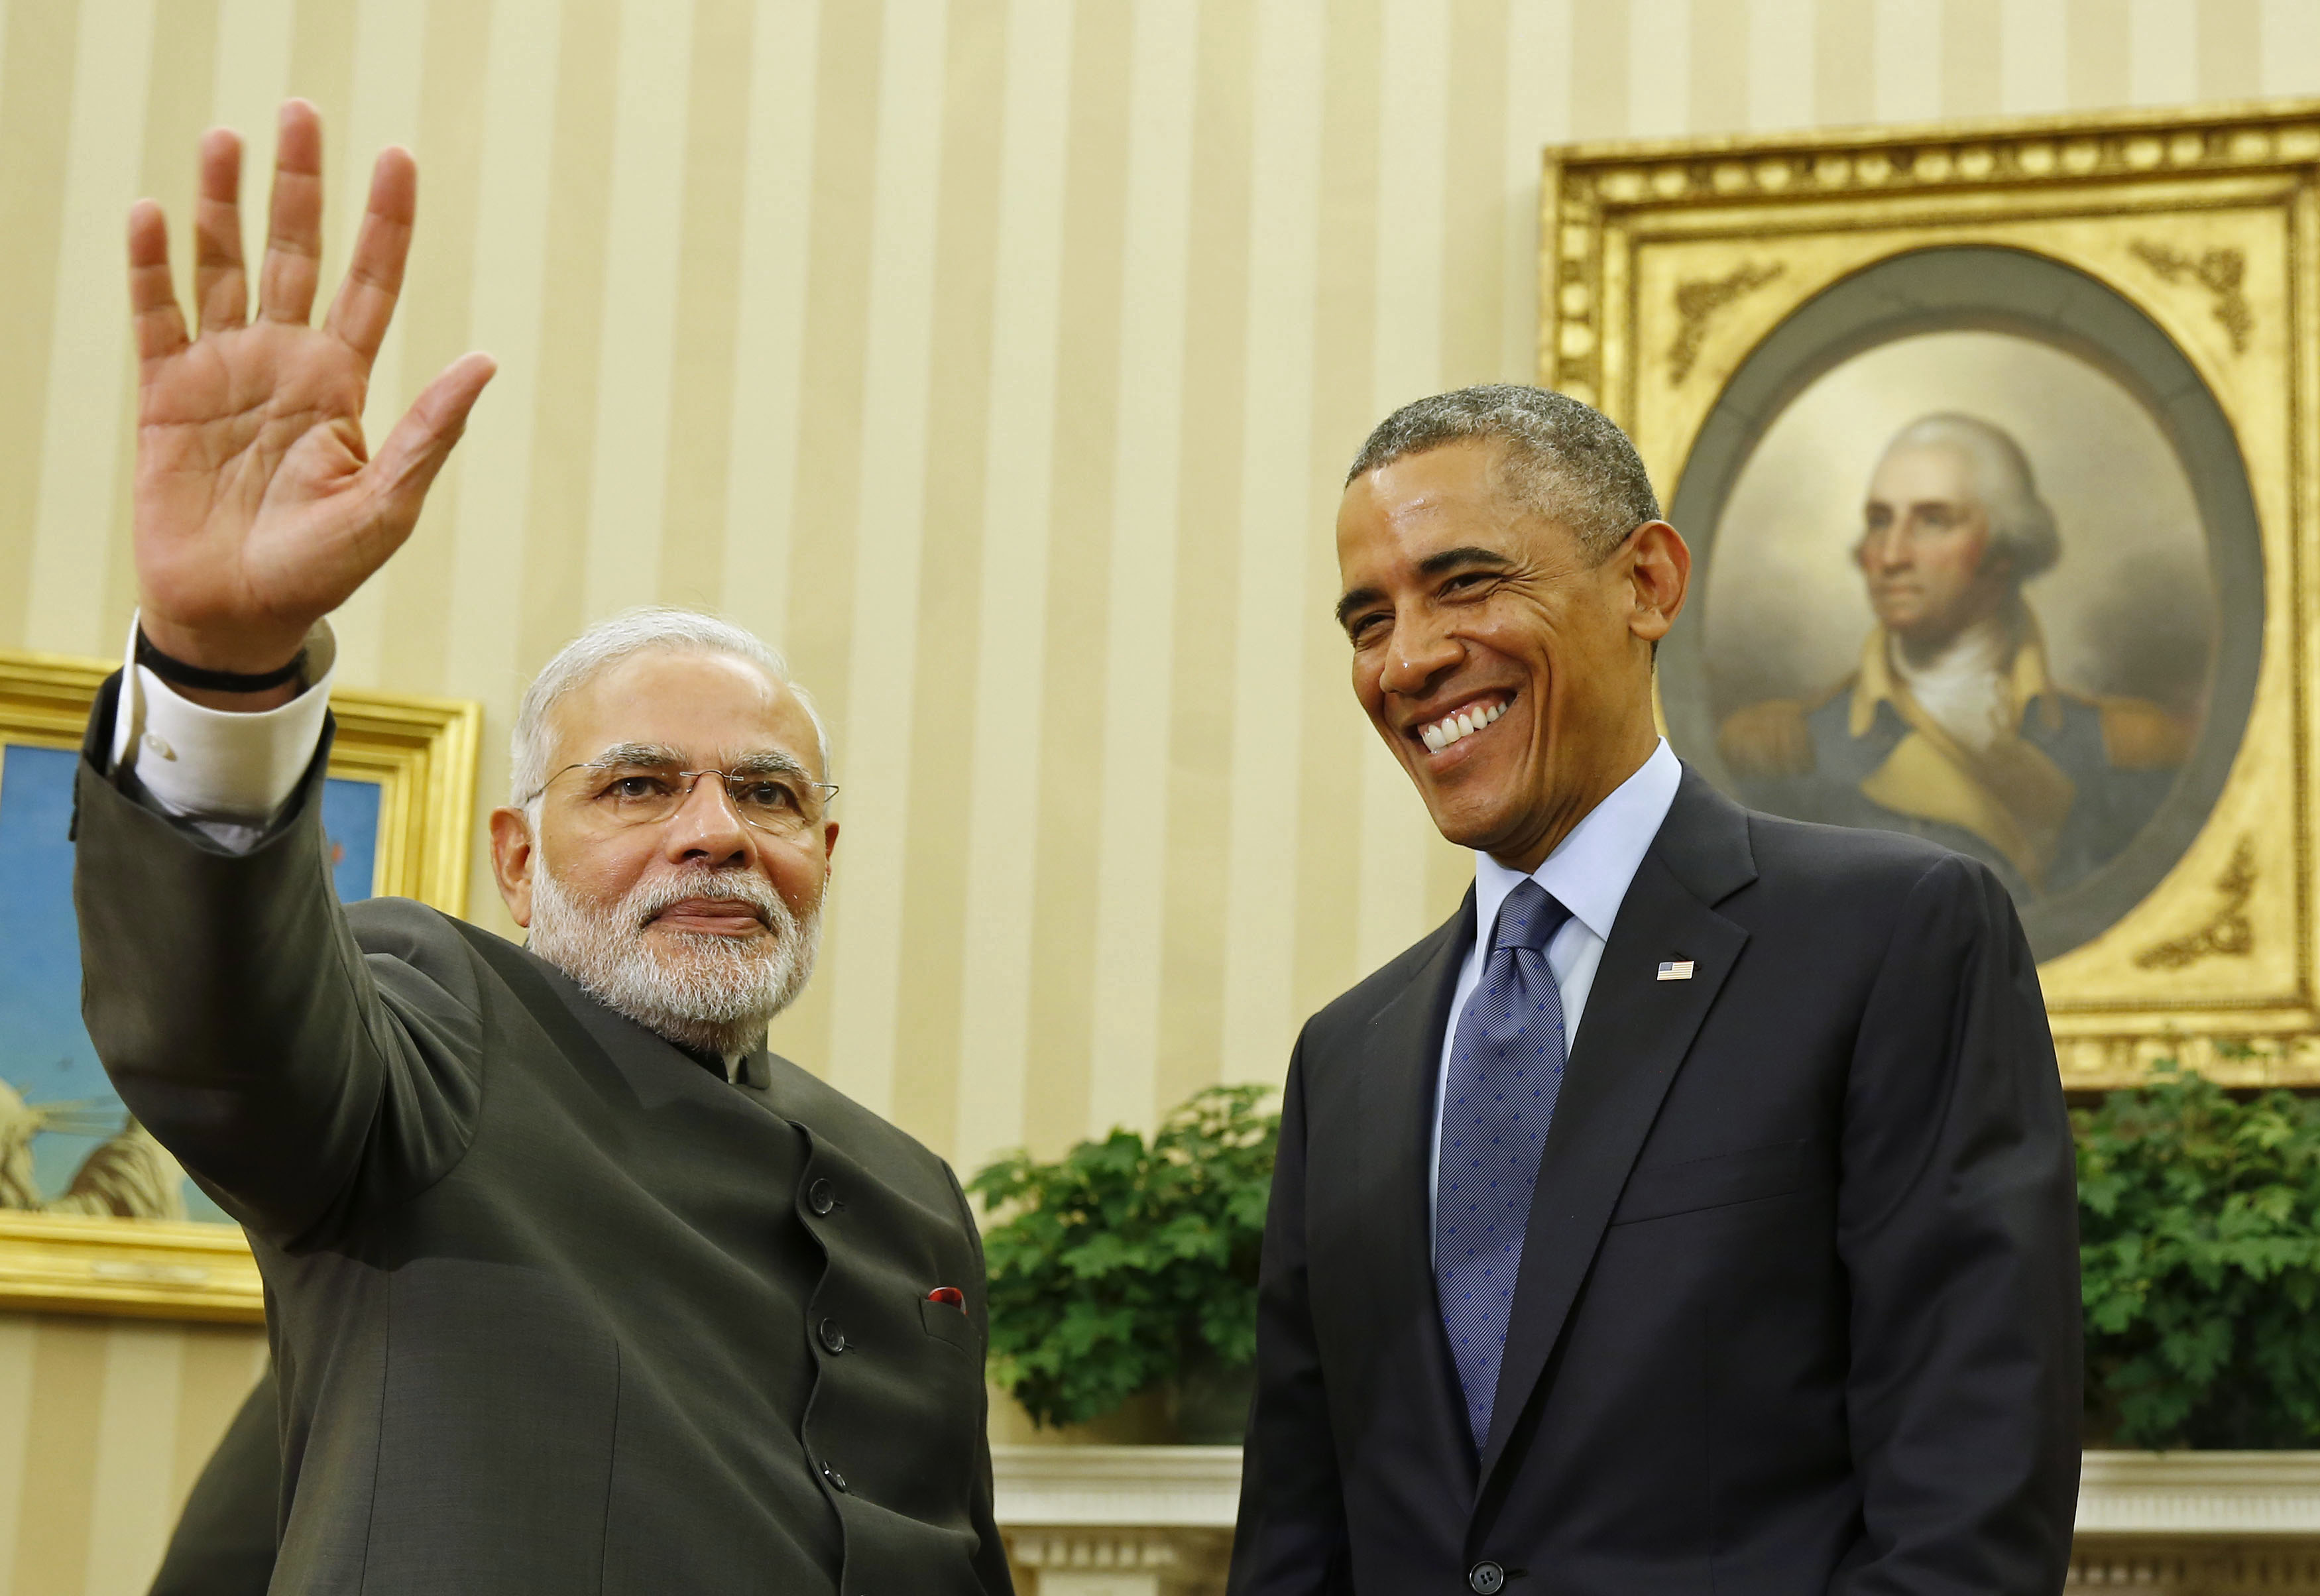 U.S. President Barack Obama hosts a meeting with India's PM Narendra Modi at the White House in Washington